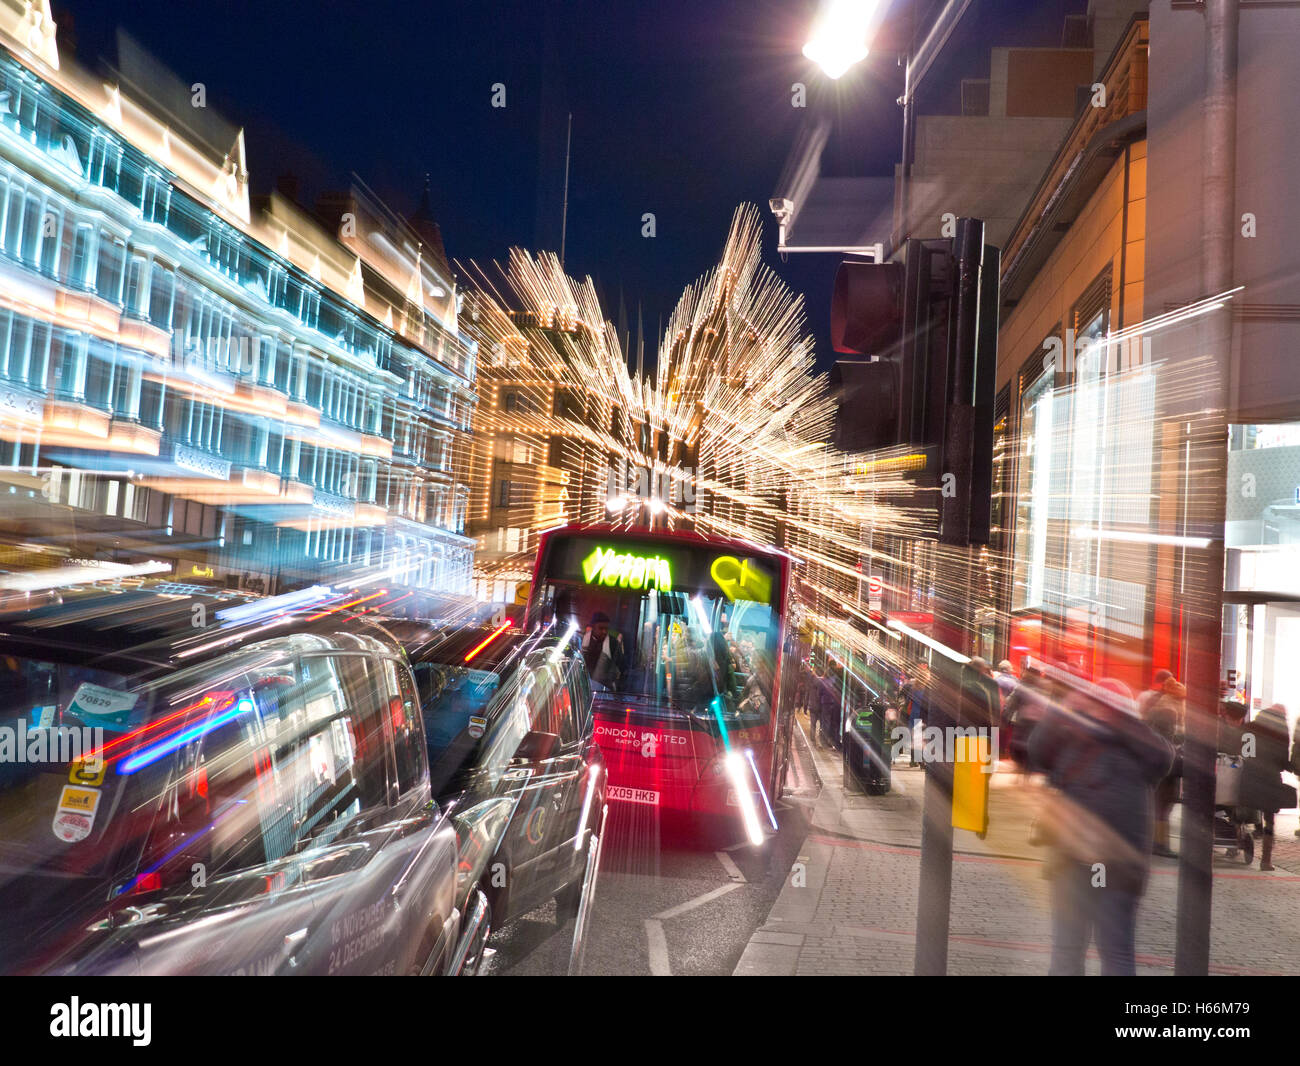 Action Shopping Bonanza Harrods and Knightsbridge department stores at dusk shoppers red bus and busy traffic with 'action zoom effect' in camera applied  Knightsbridge London SW1 Stock Photo